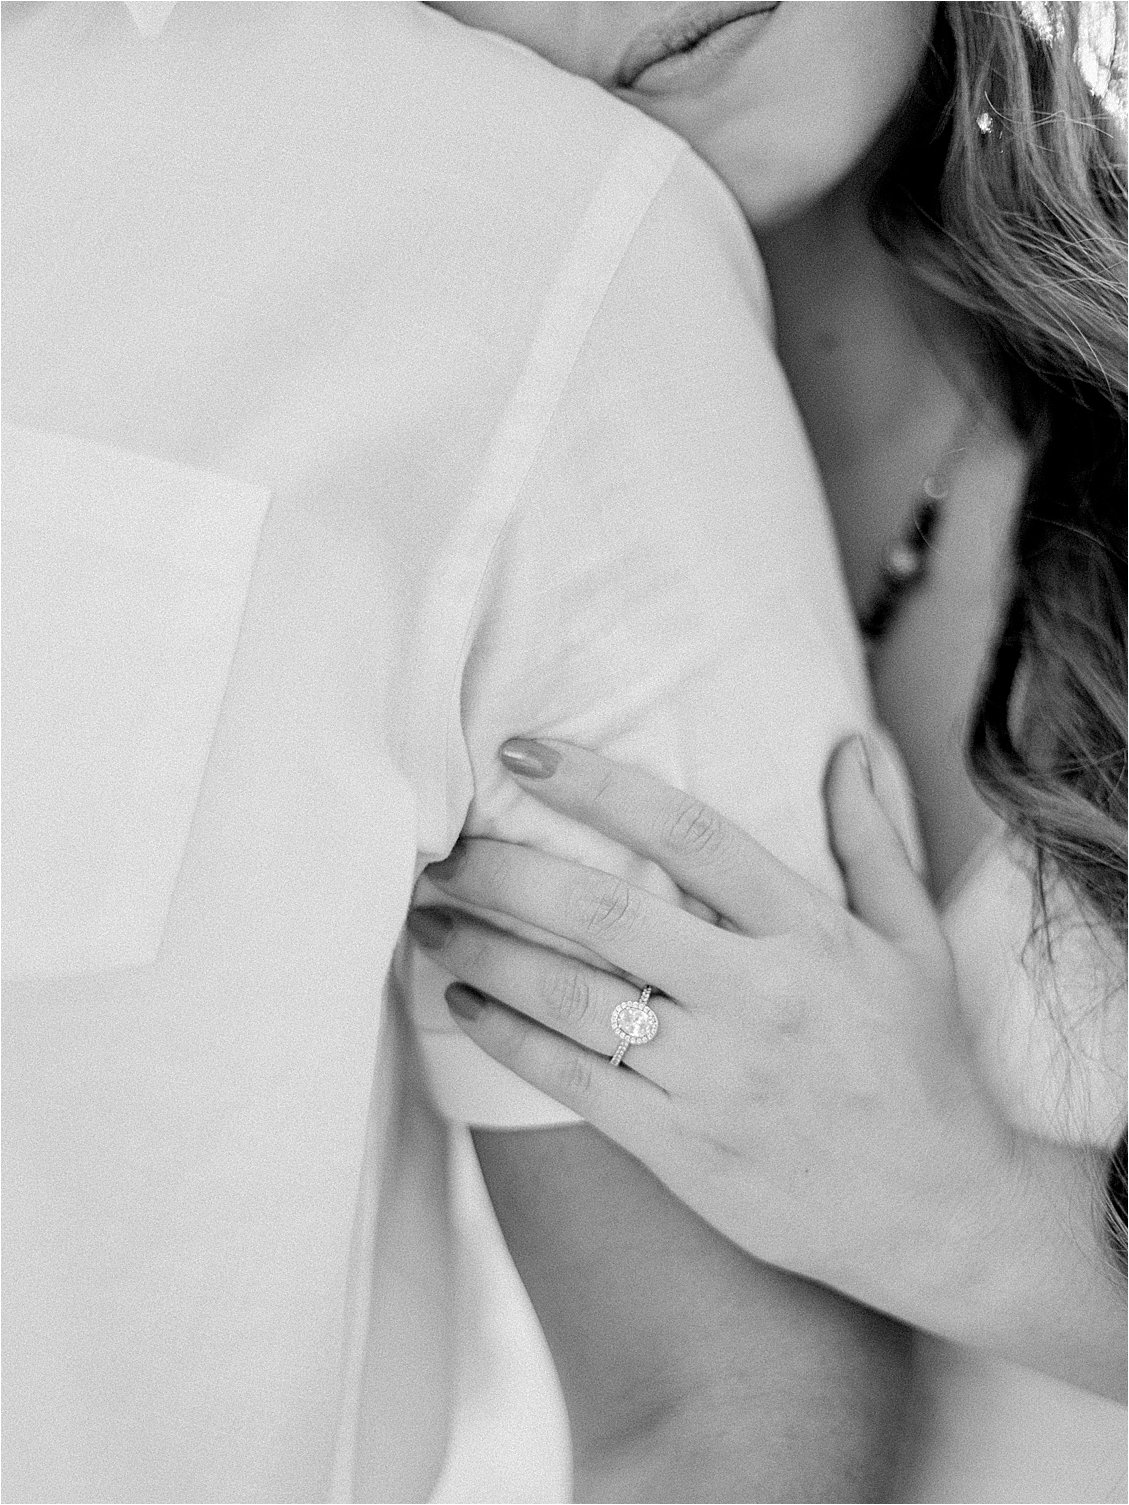 Oval Diamond Engagement Ring in Palm Beach, Florida Engagement Session with film wedding photographer, Renee Hollingshead